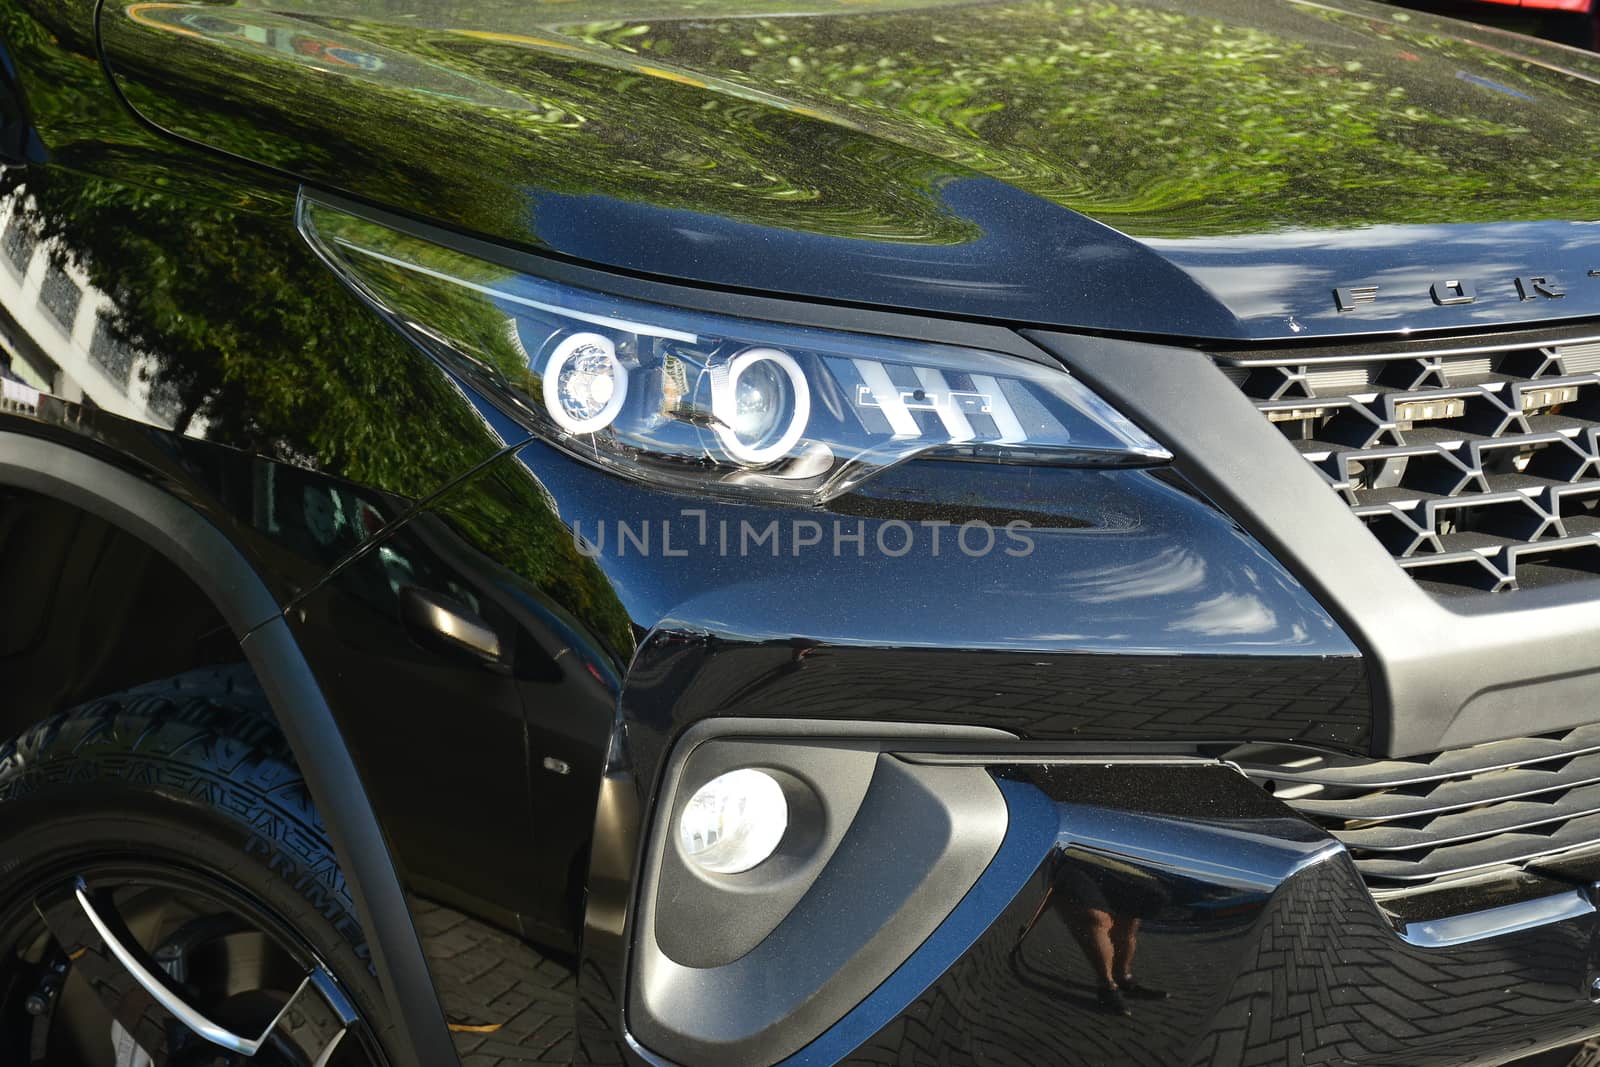 PASAY, PH - DEC 8 - Toyota fortuner suv headlight at Bumper to Bumper car show on December 8, 2018 in Pasay, Philippines.